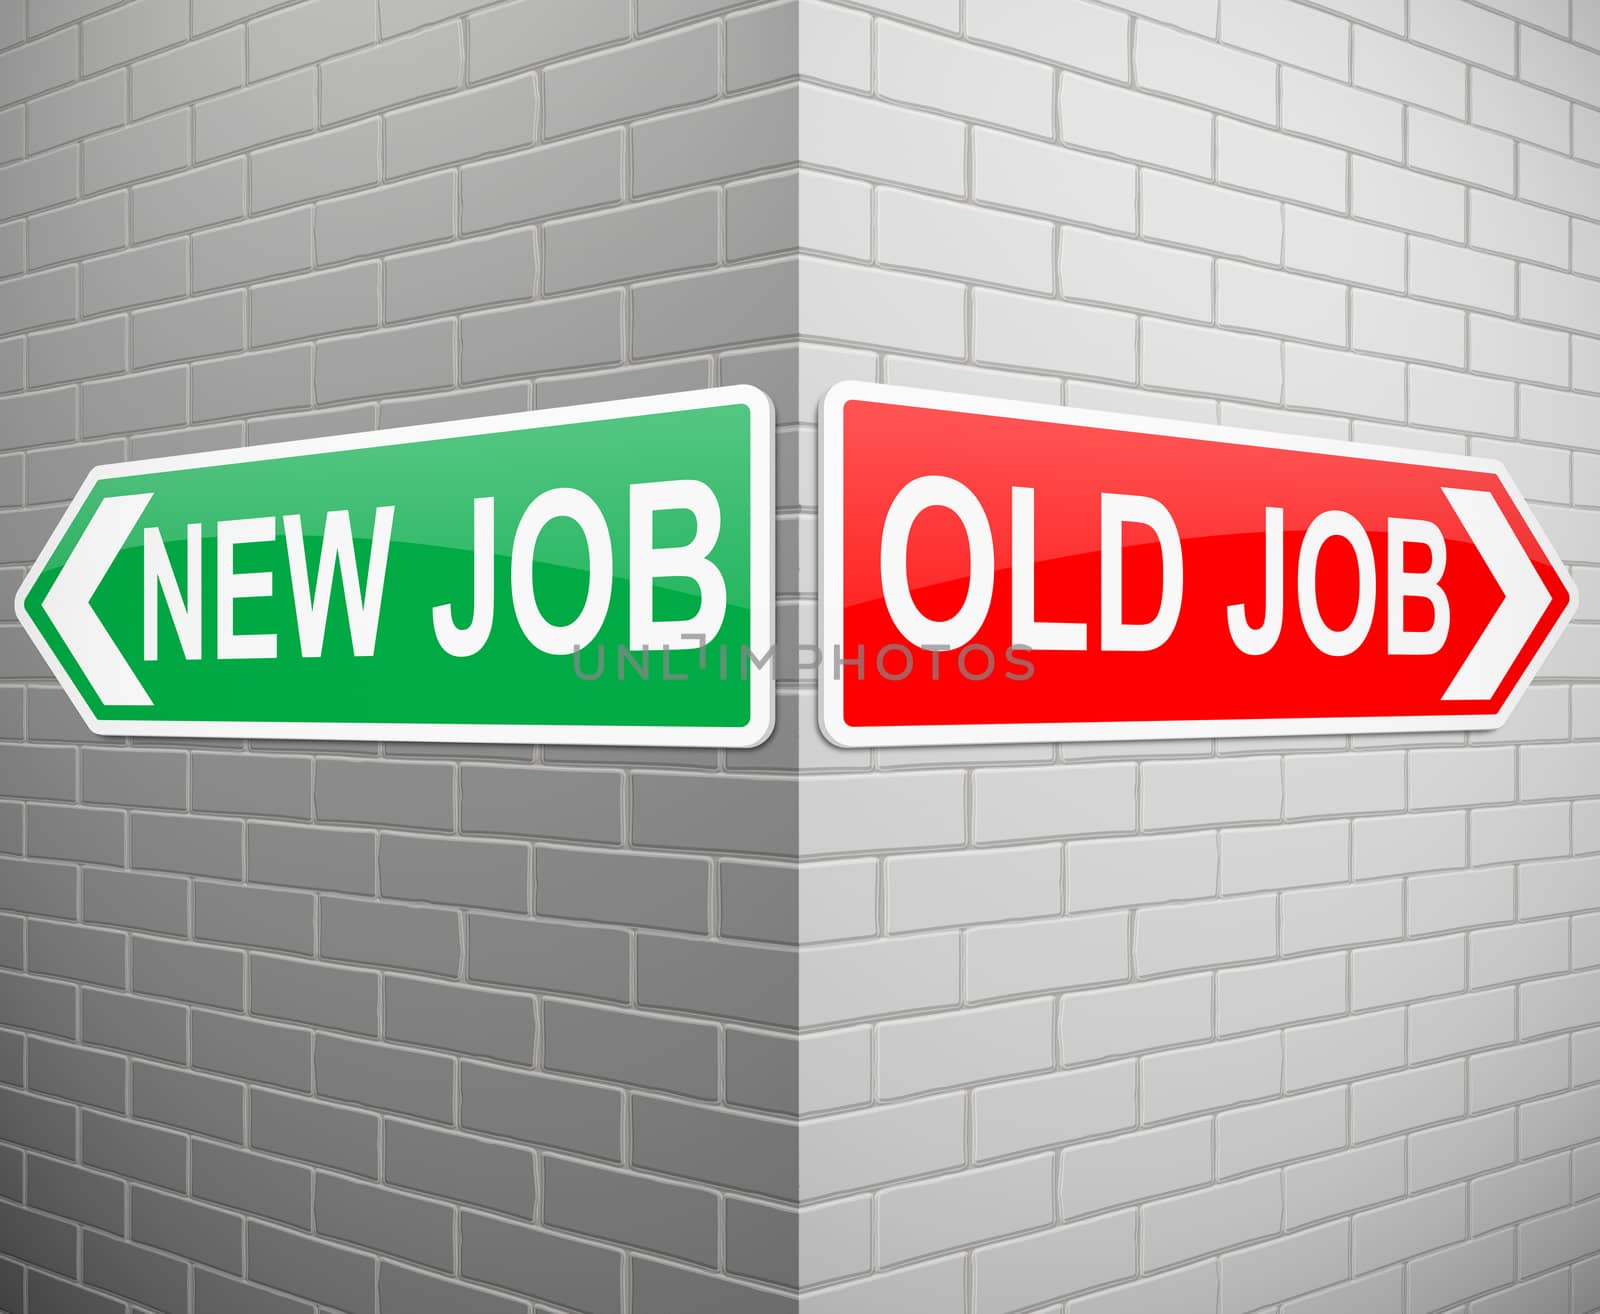 Illustration depicting signs with a new job and old job concept.